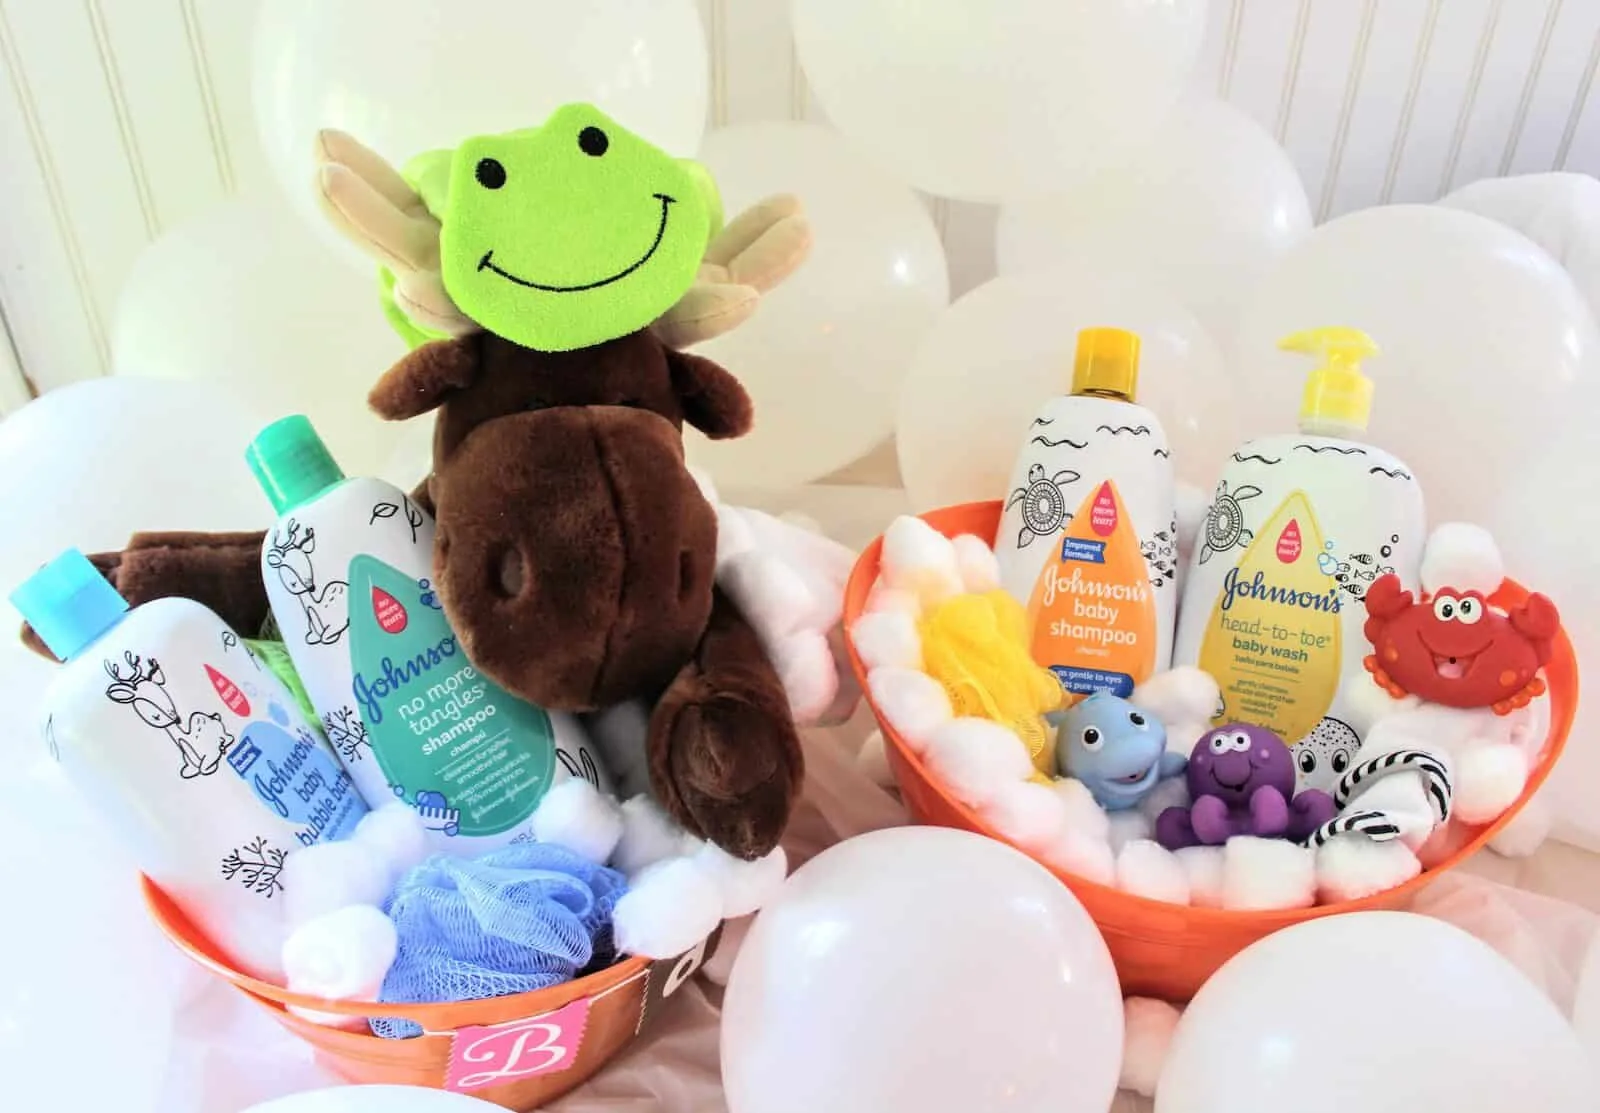 New baby gift basket items.